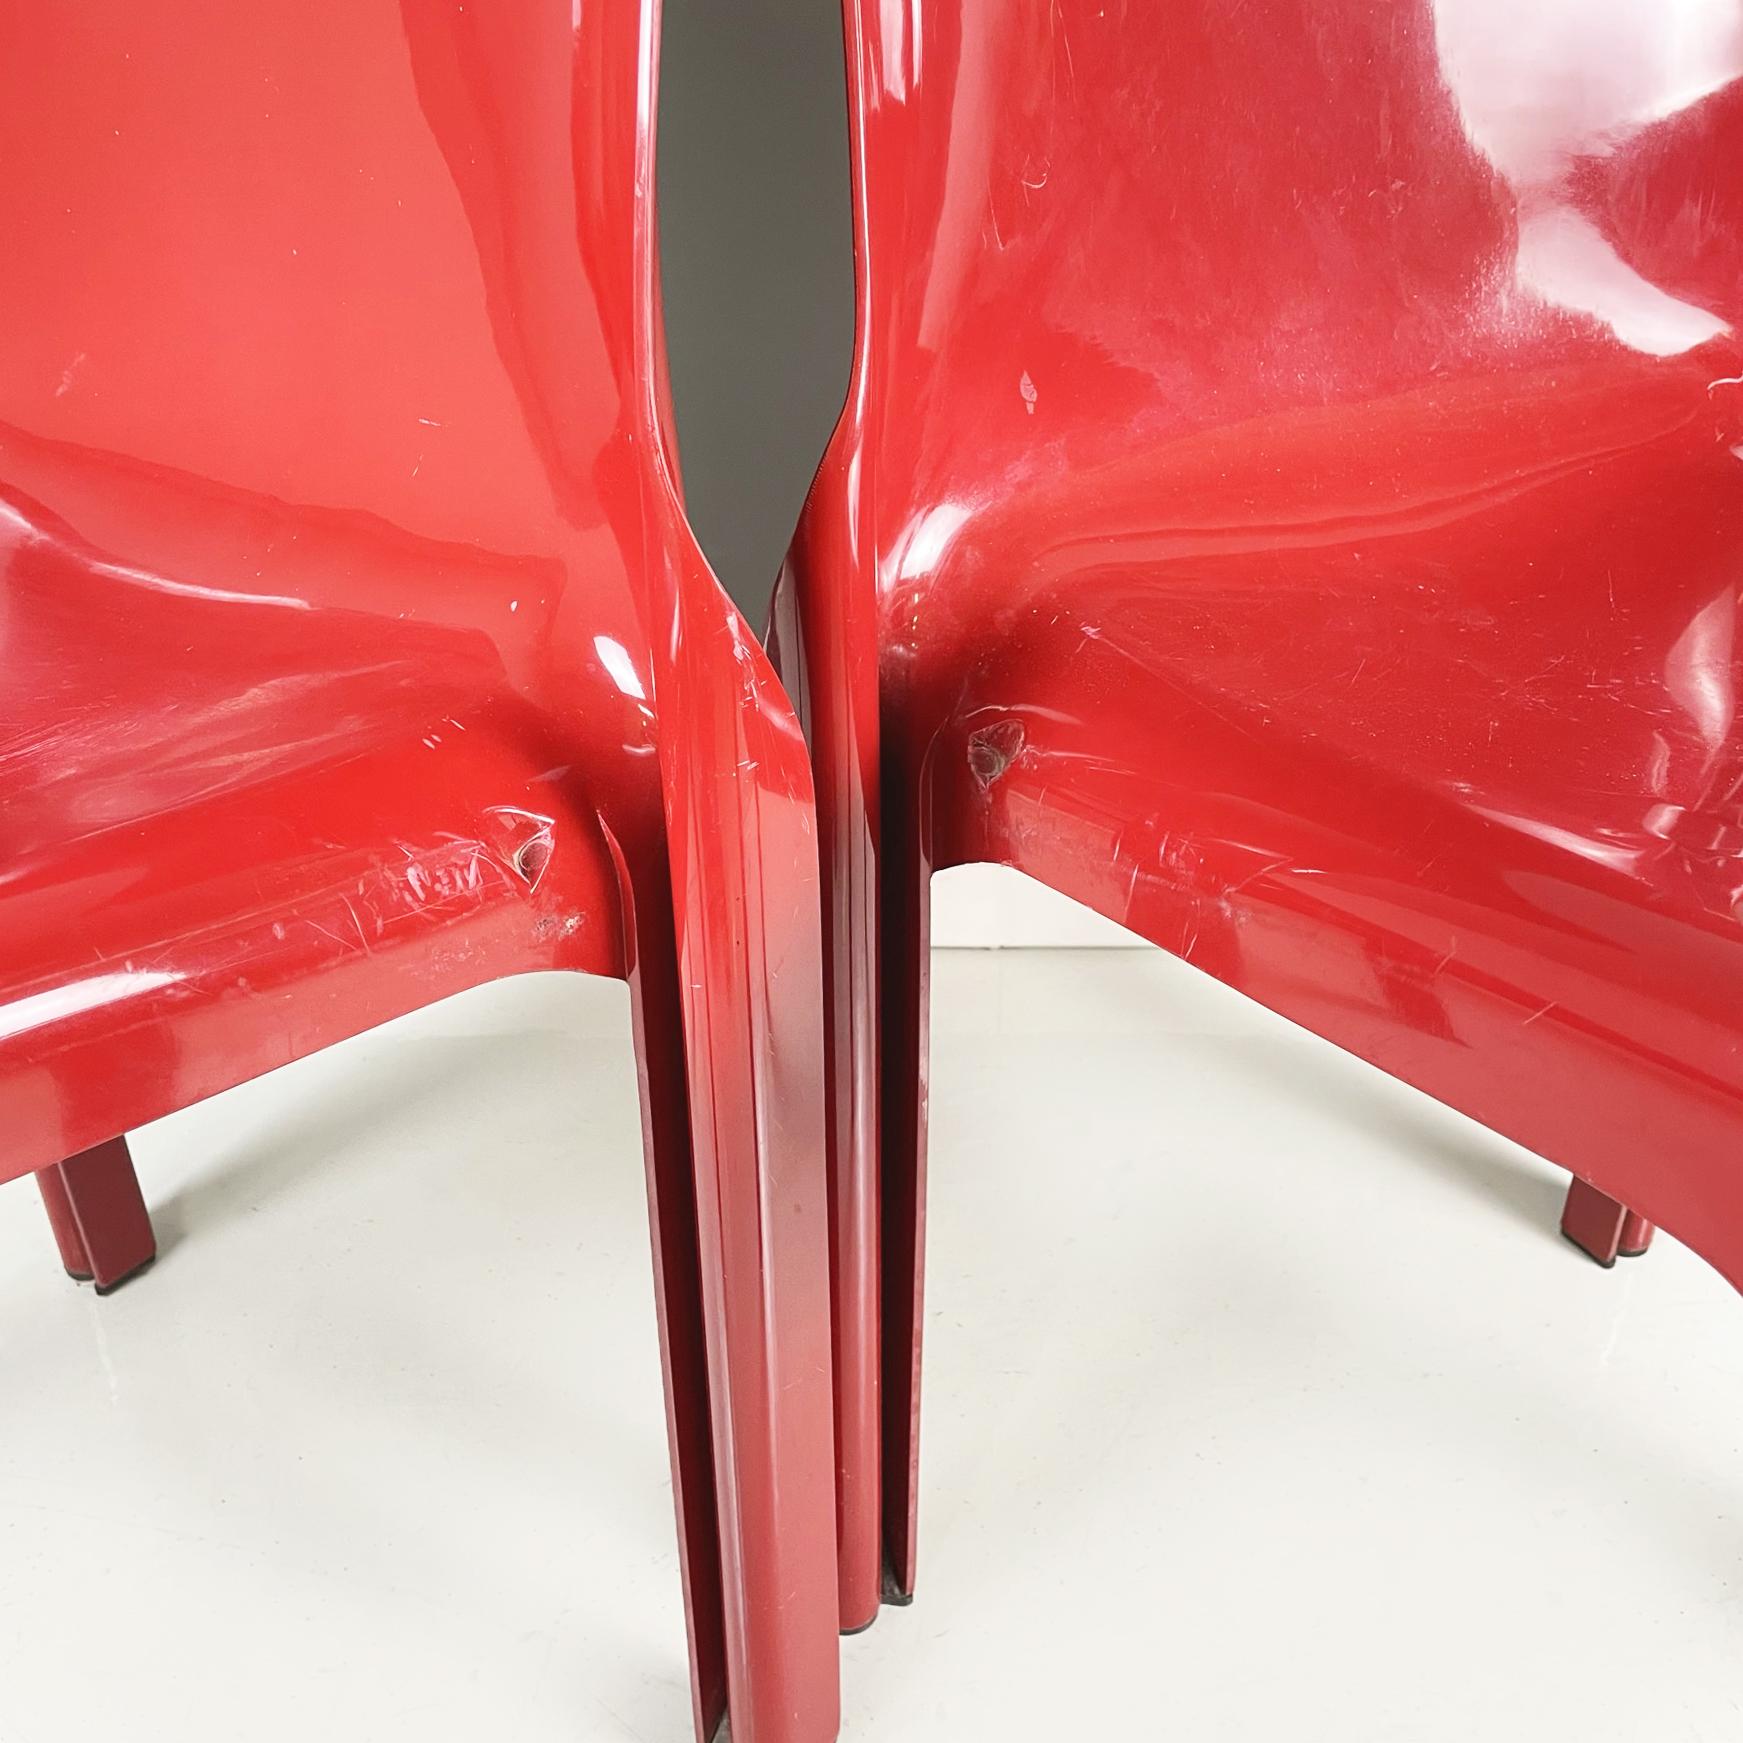 Italian modern plastic red Chairs Selene by Vico Magistretti for Artemide, 1960s For Sale 8